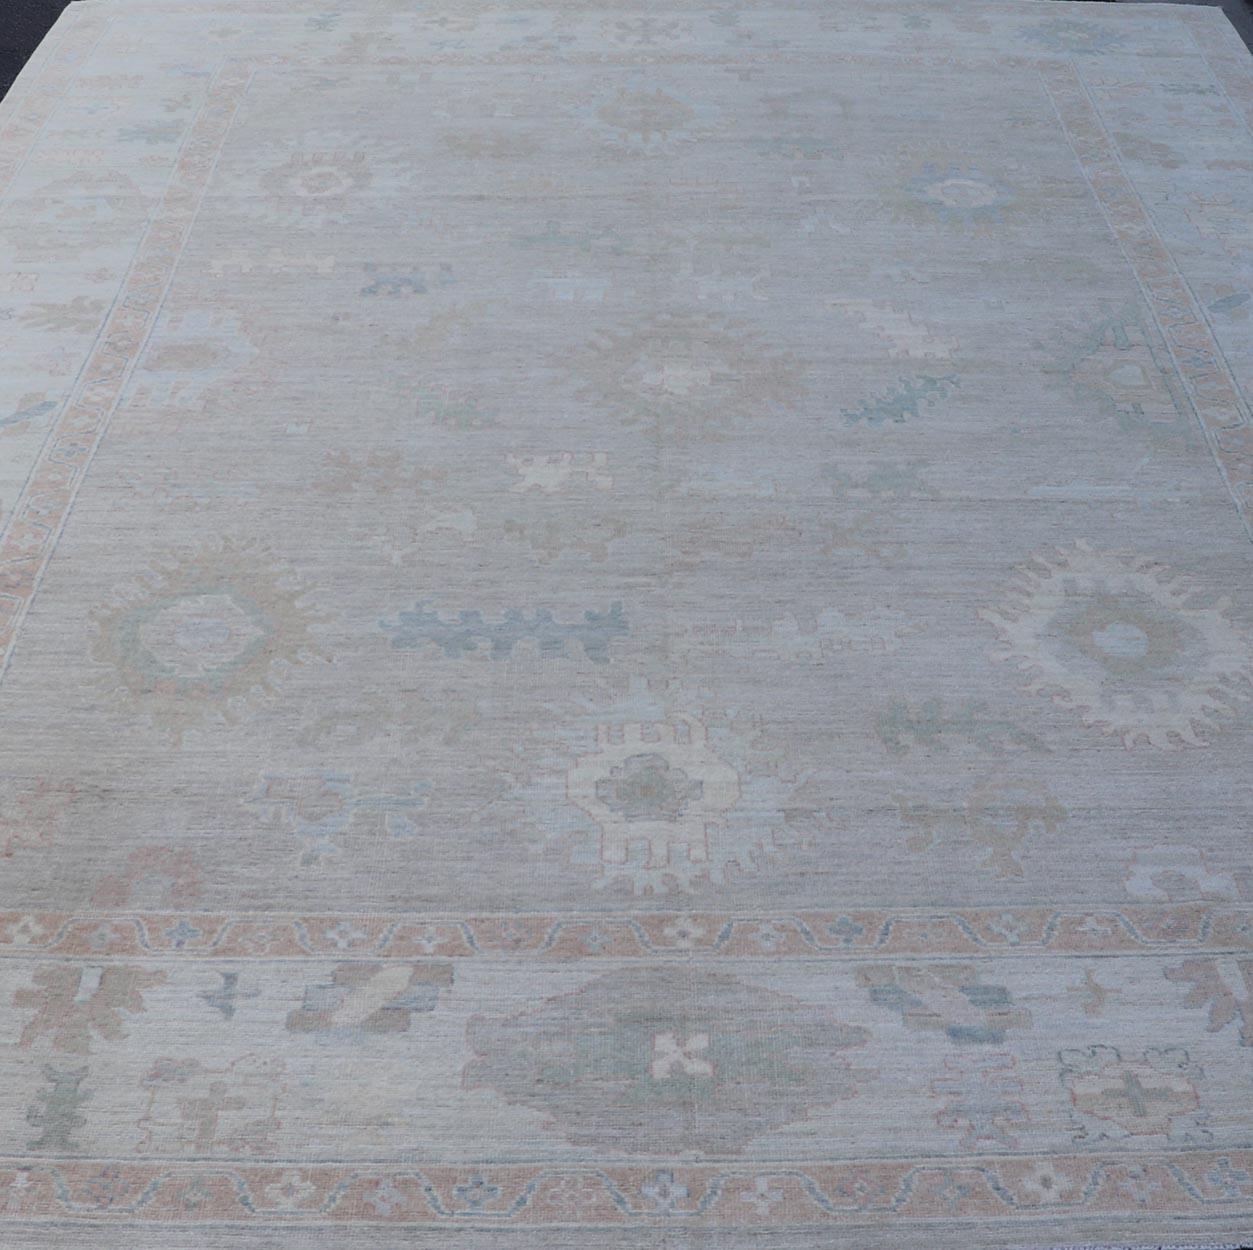 All-Over Floral Modern Oushak with Light Tan Background and Cream Border. Keivan Woven Arts rug AWR-17919 Country of Origin: Afghanistan Type: Oushak Design: Floral, all-over, abstract floral.
Measures: 10'1 x 13'10 
This Oushak was hand knotted in